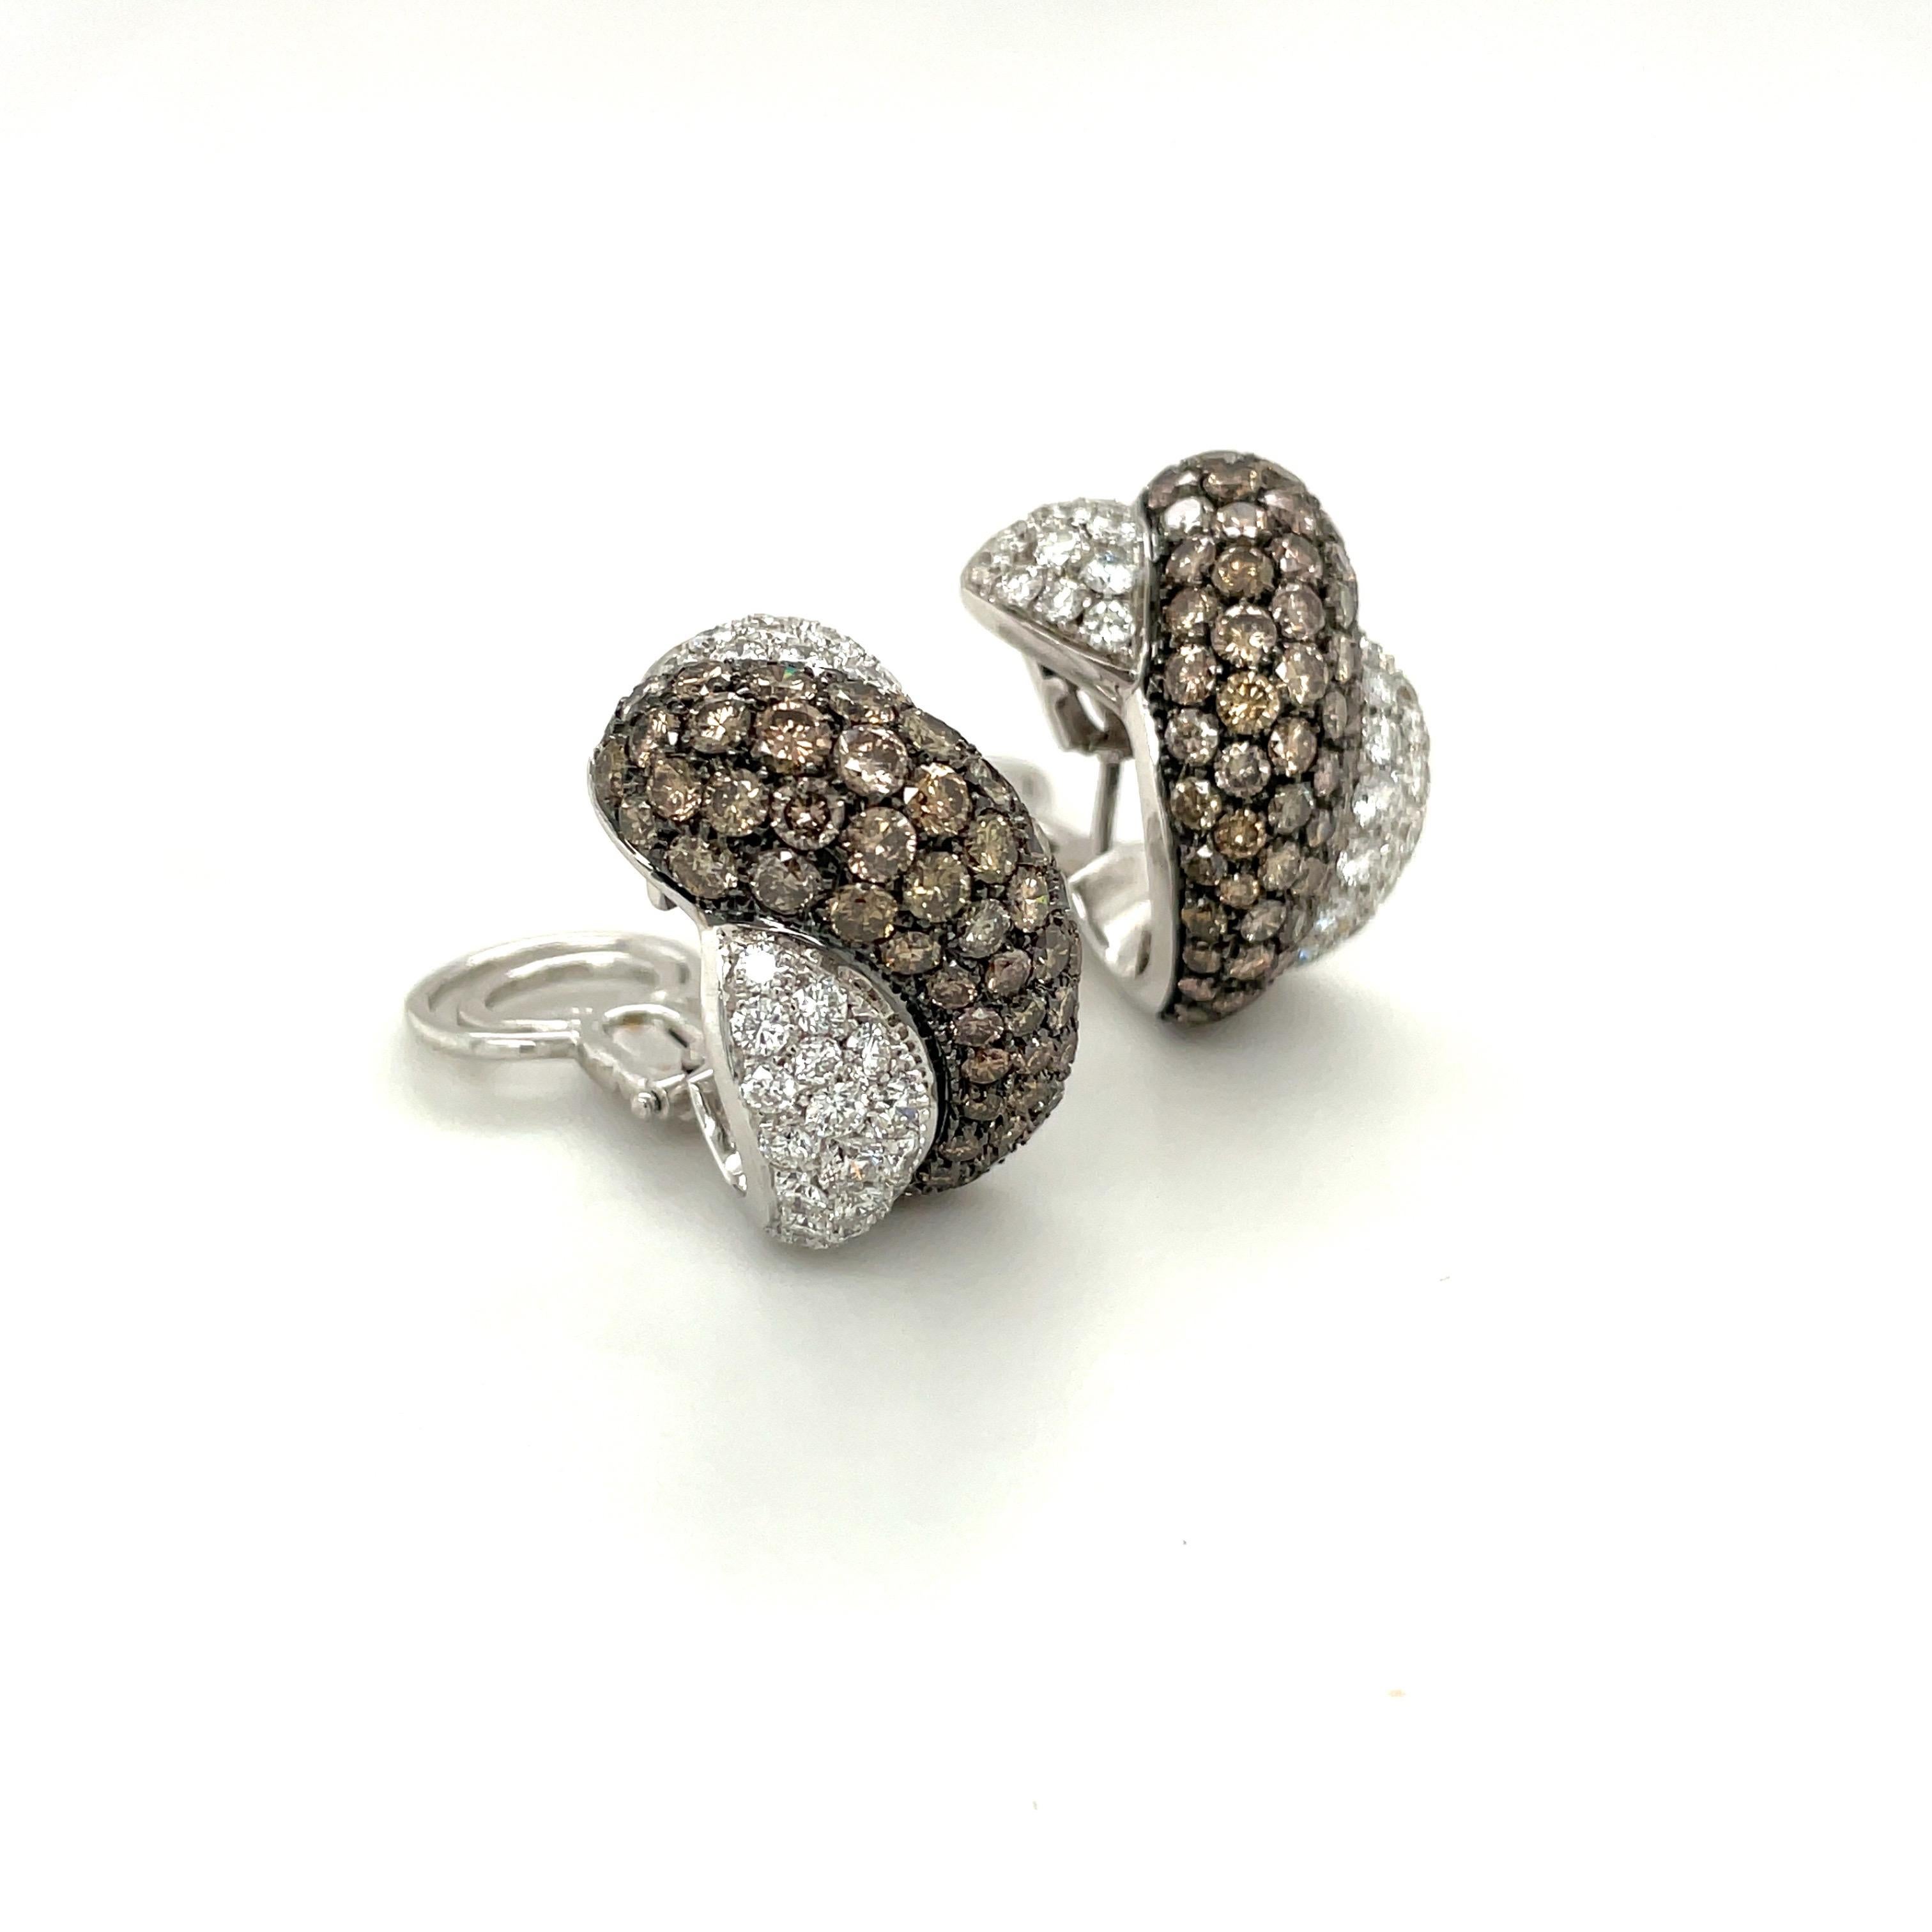 Crafted by Roberto Coin of Italy, these 18 karat white gold earrings are real showstoppers. Designed as a half hoop  which has been meticulously pave set with round brilliant brown and white diamonds. The brown diamonds are set in a blackened gold,